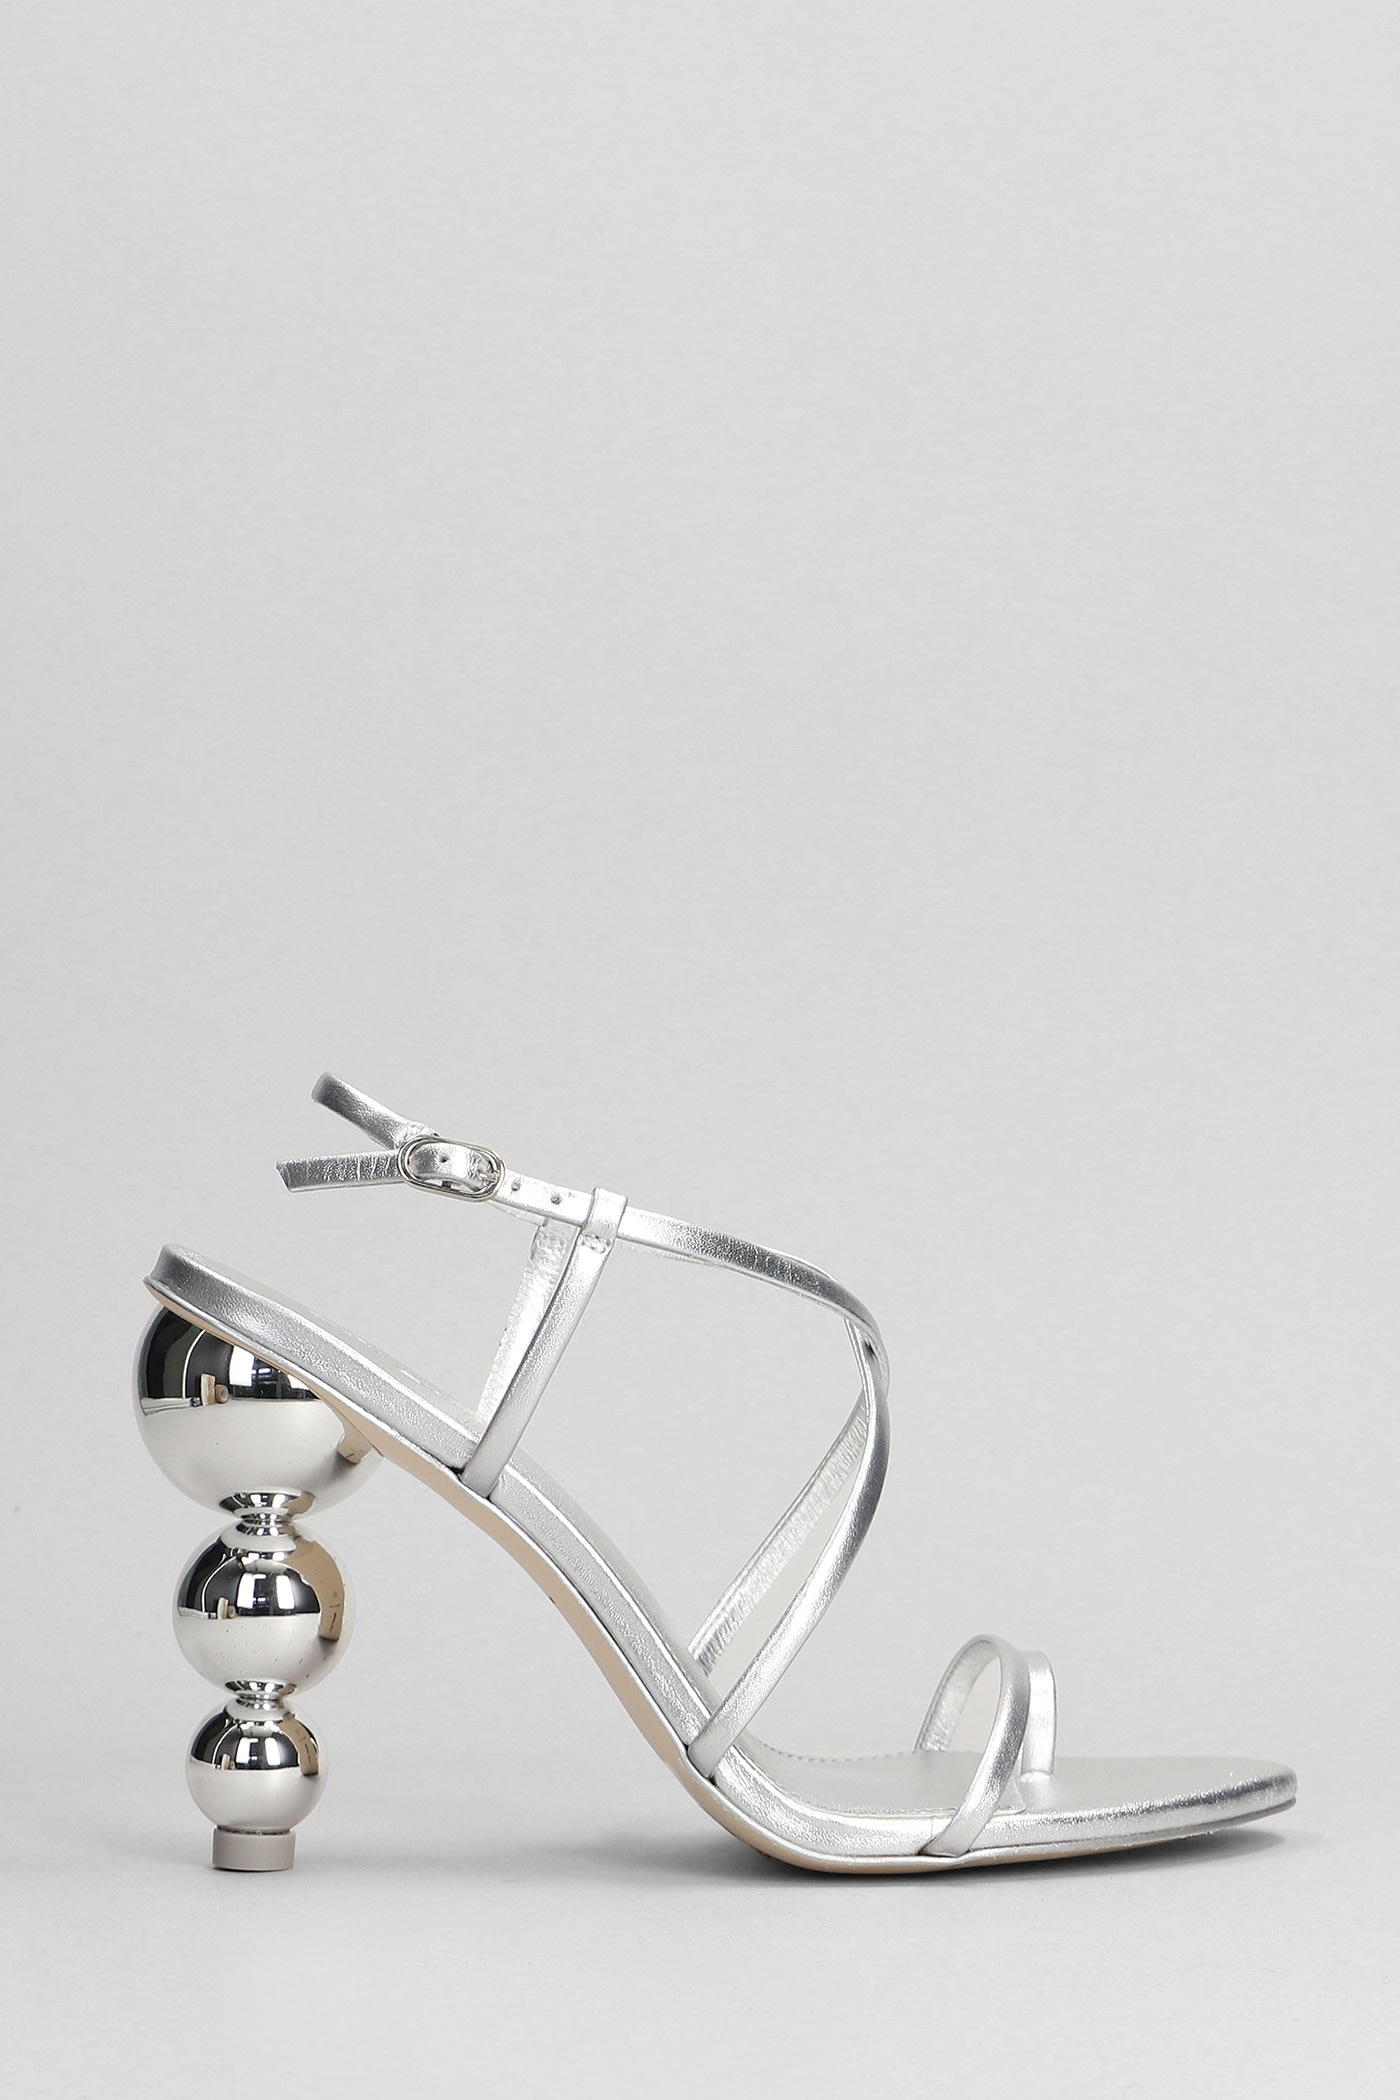 Robyn Sandals In Silver Leather Sandals